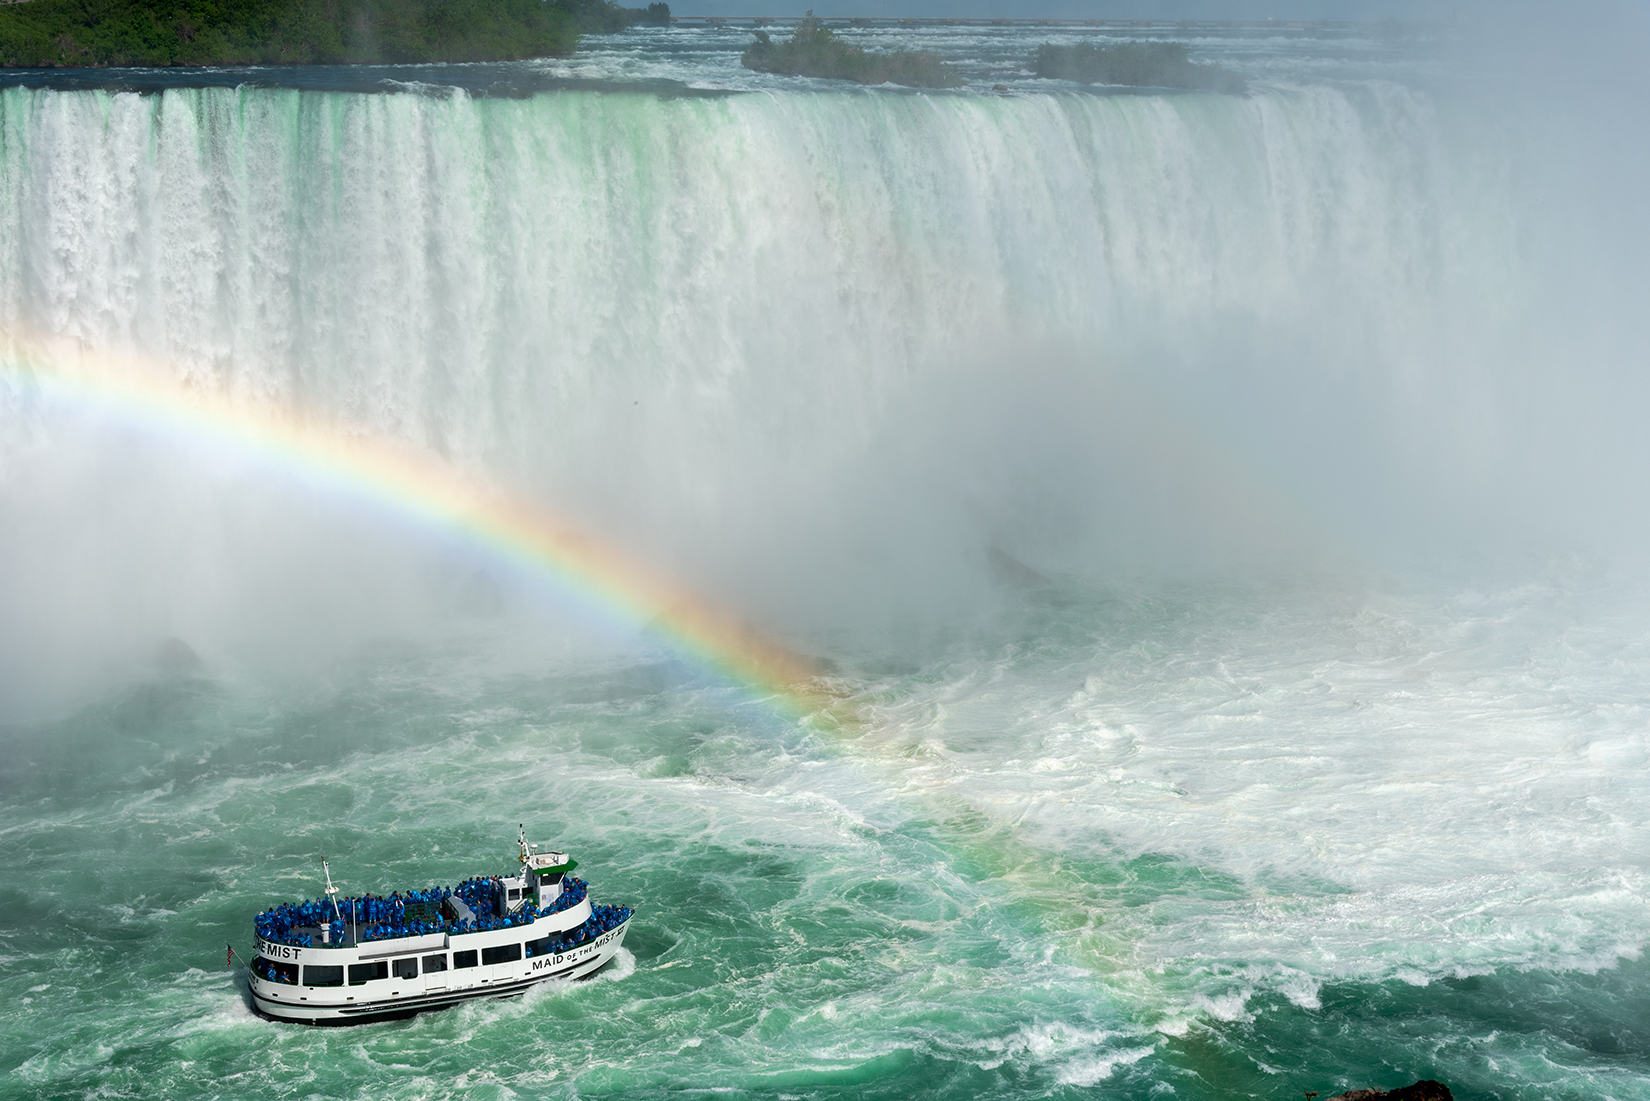  'Maid of the Mist' boat cruise which carries passengers into the rapids immediately below the falls